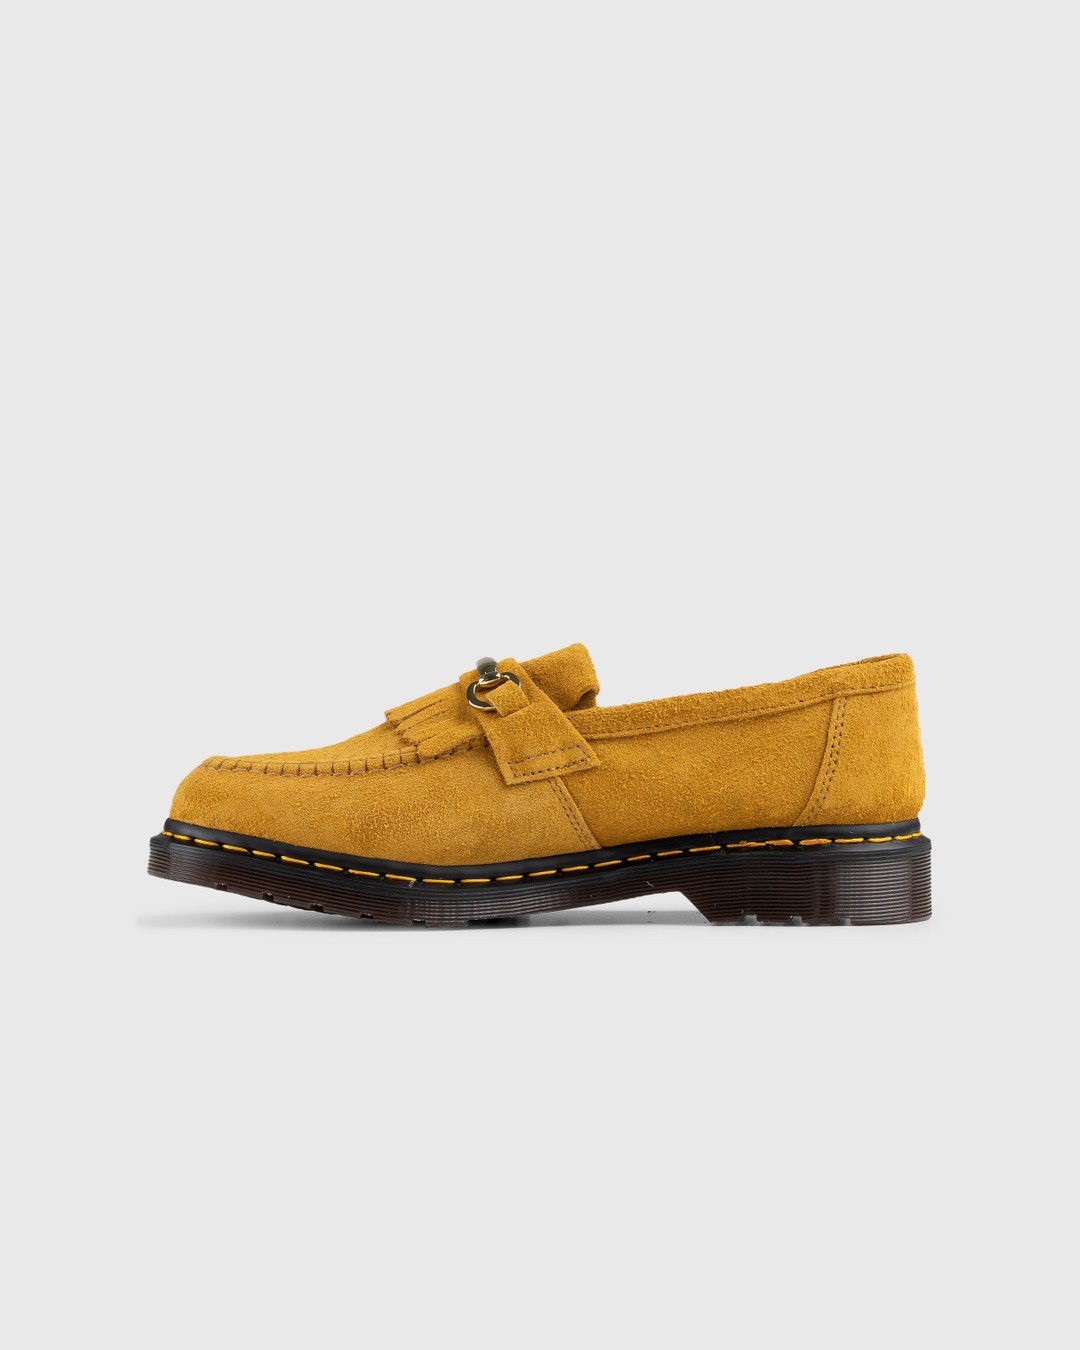 Dr. Martens – Adrian Snaffle Suede Loafers Light Tan Desert Oasis Suede (Gum Oil) - Loafers - Brown - Image 2